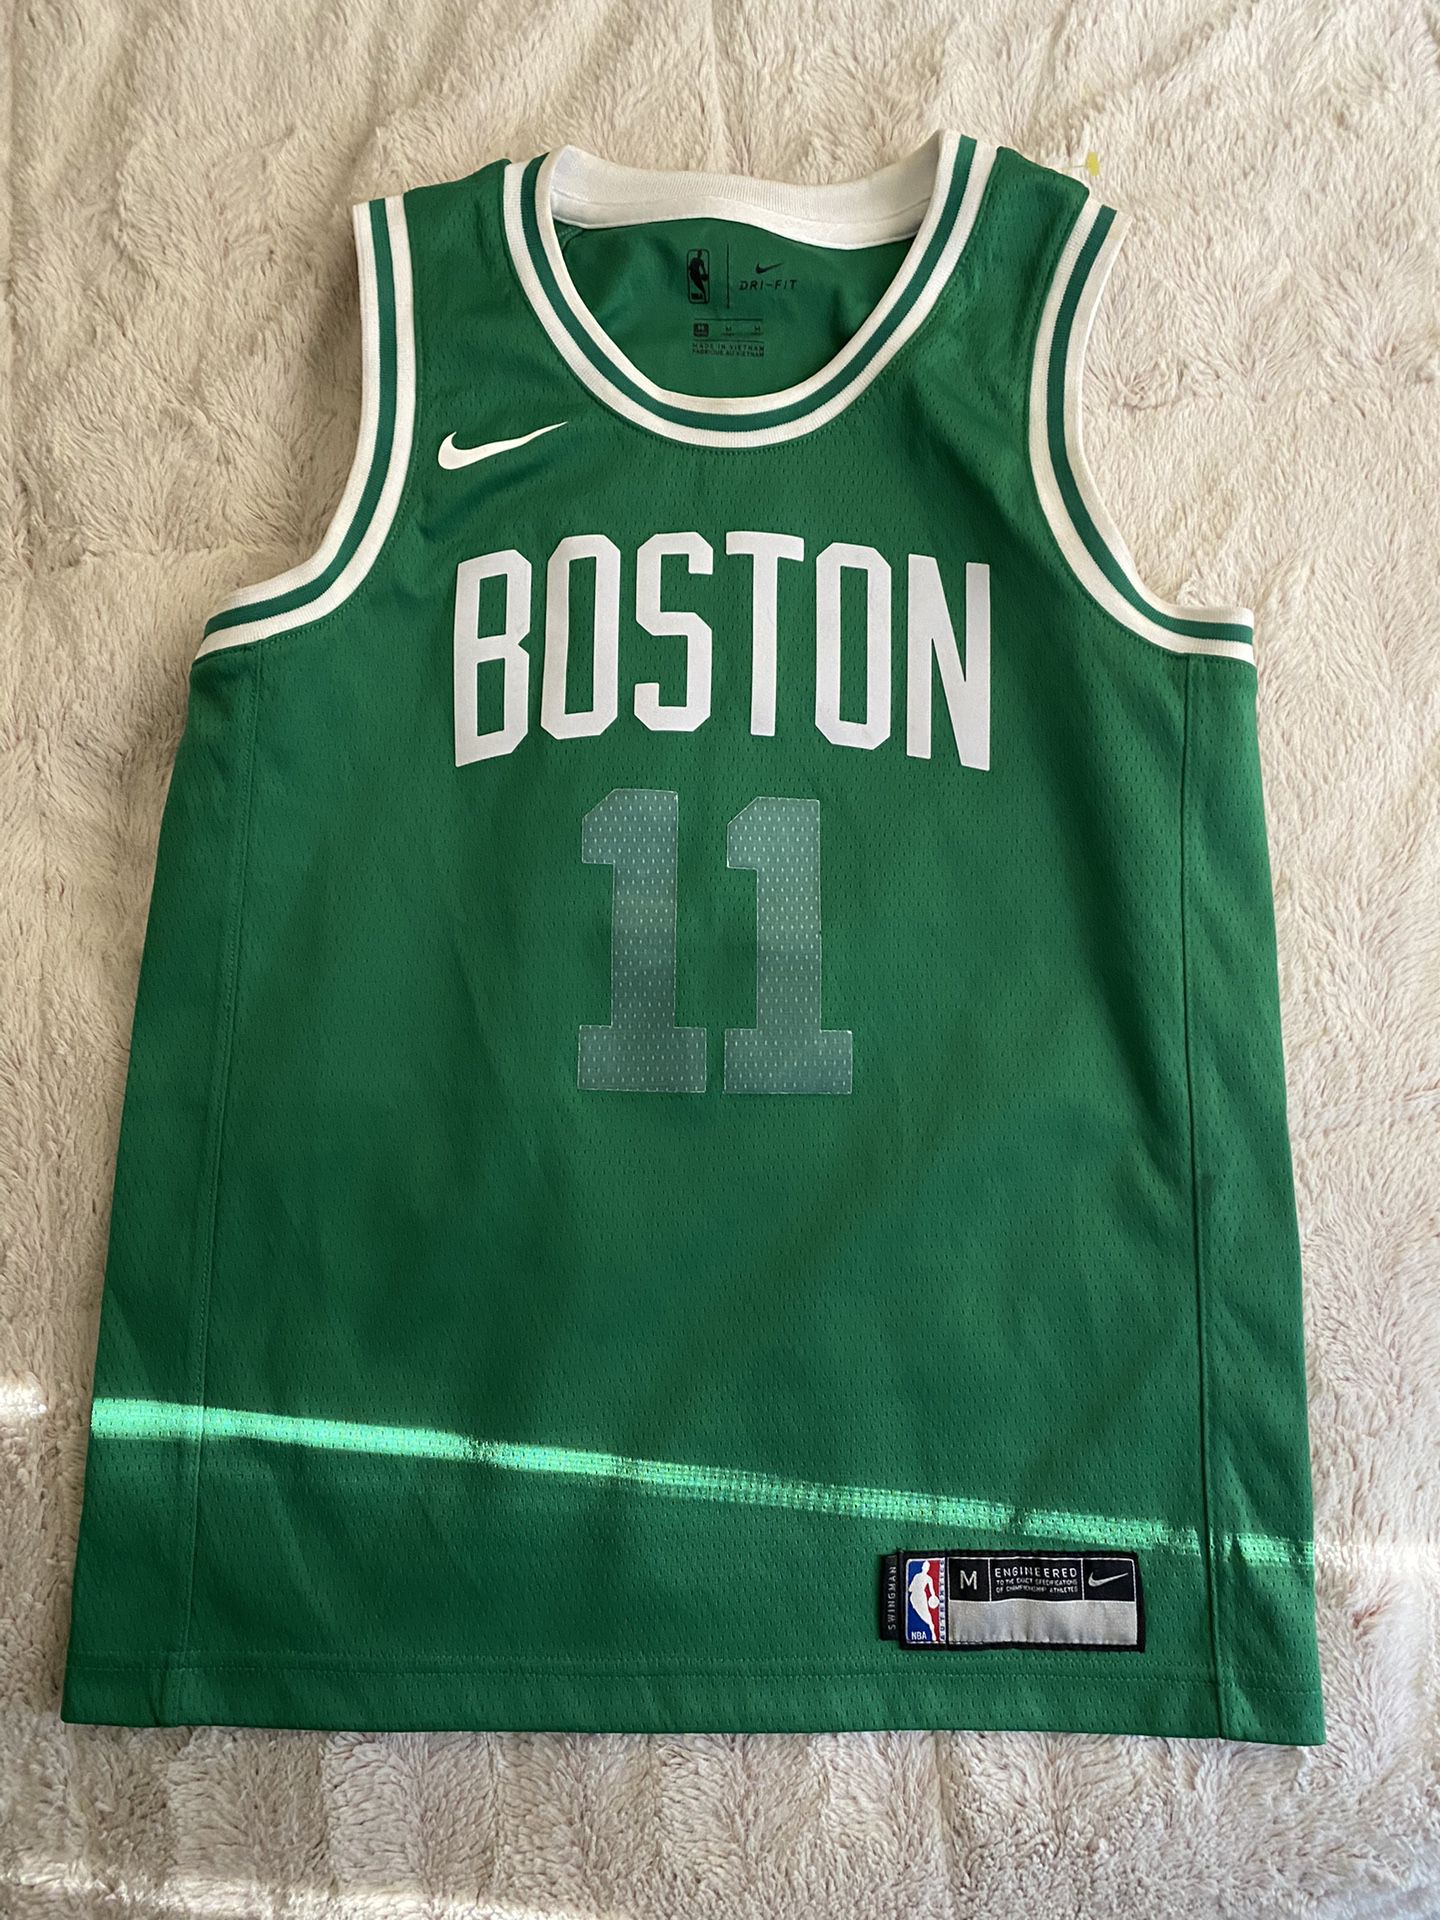 Fanatics Kyrie Irving #11 Boston Celtics Jersey Youth Size Medium NBA  Champion for Sale in Westmont, IL - OfferUp